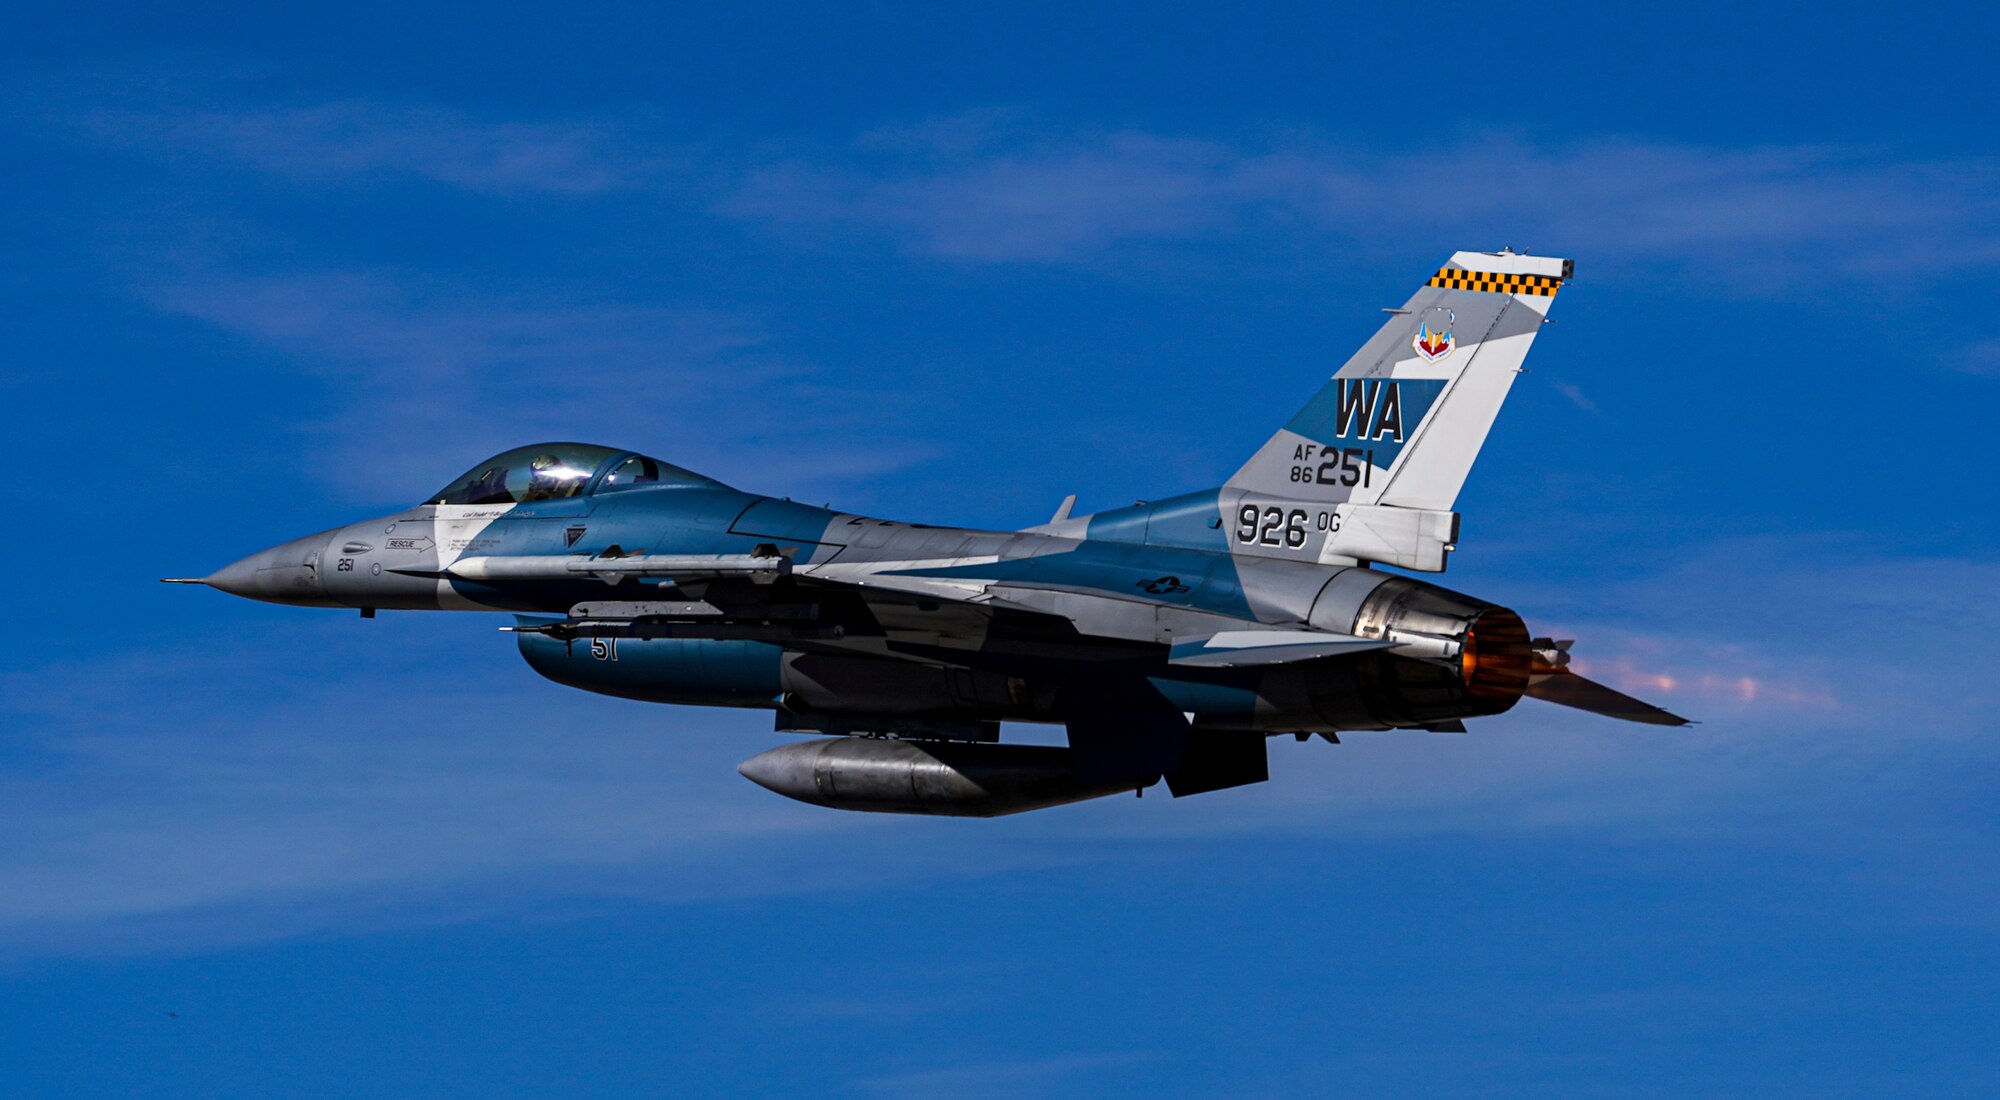 An F-16 Fighting Falcon takes off